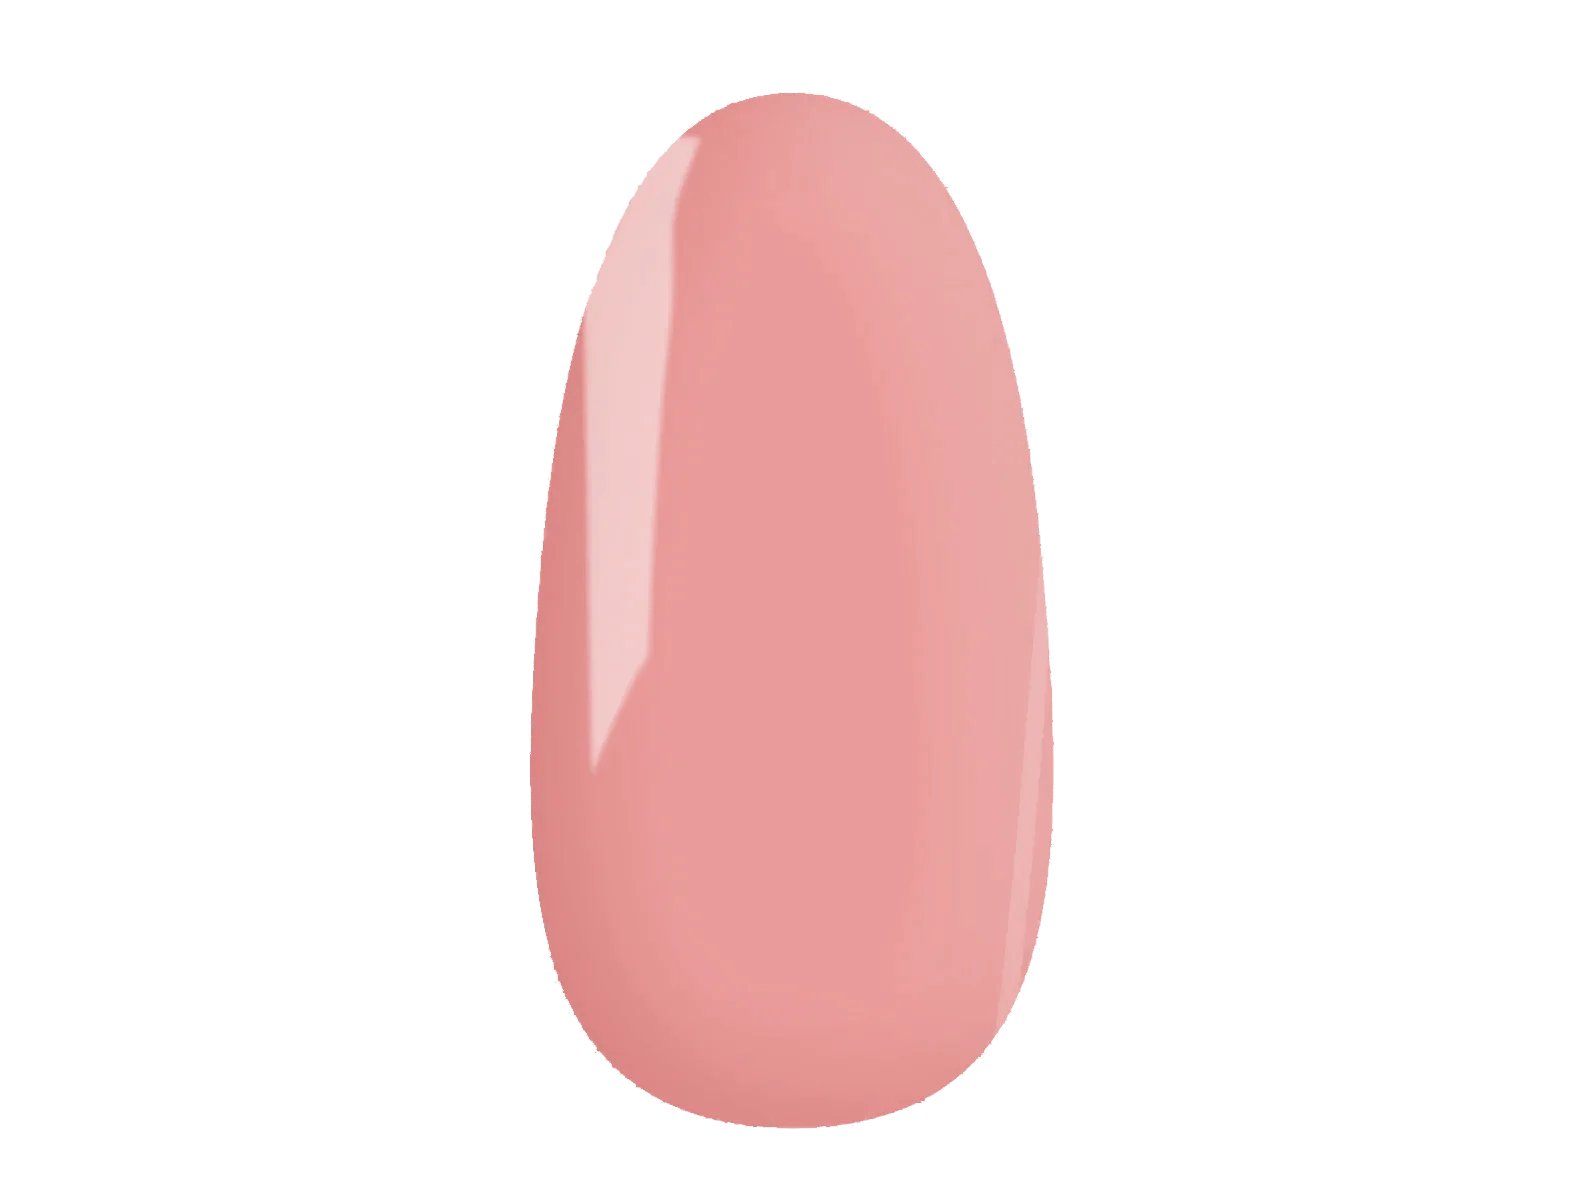 Baby Pink - Gel Polish - 14 Day Manicure - Nail Tip 